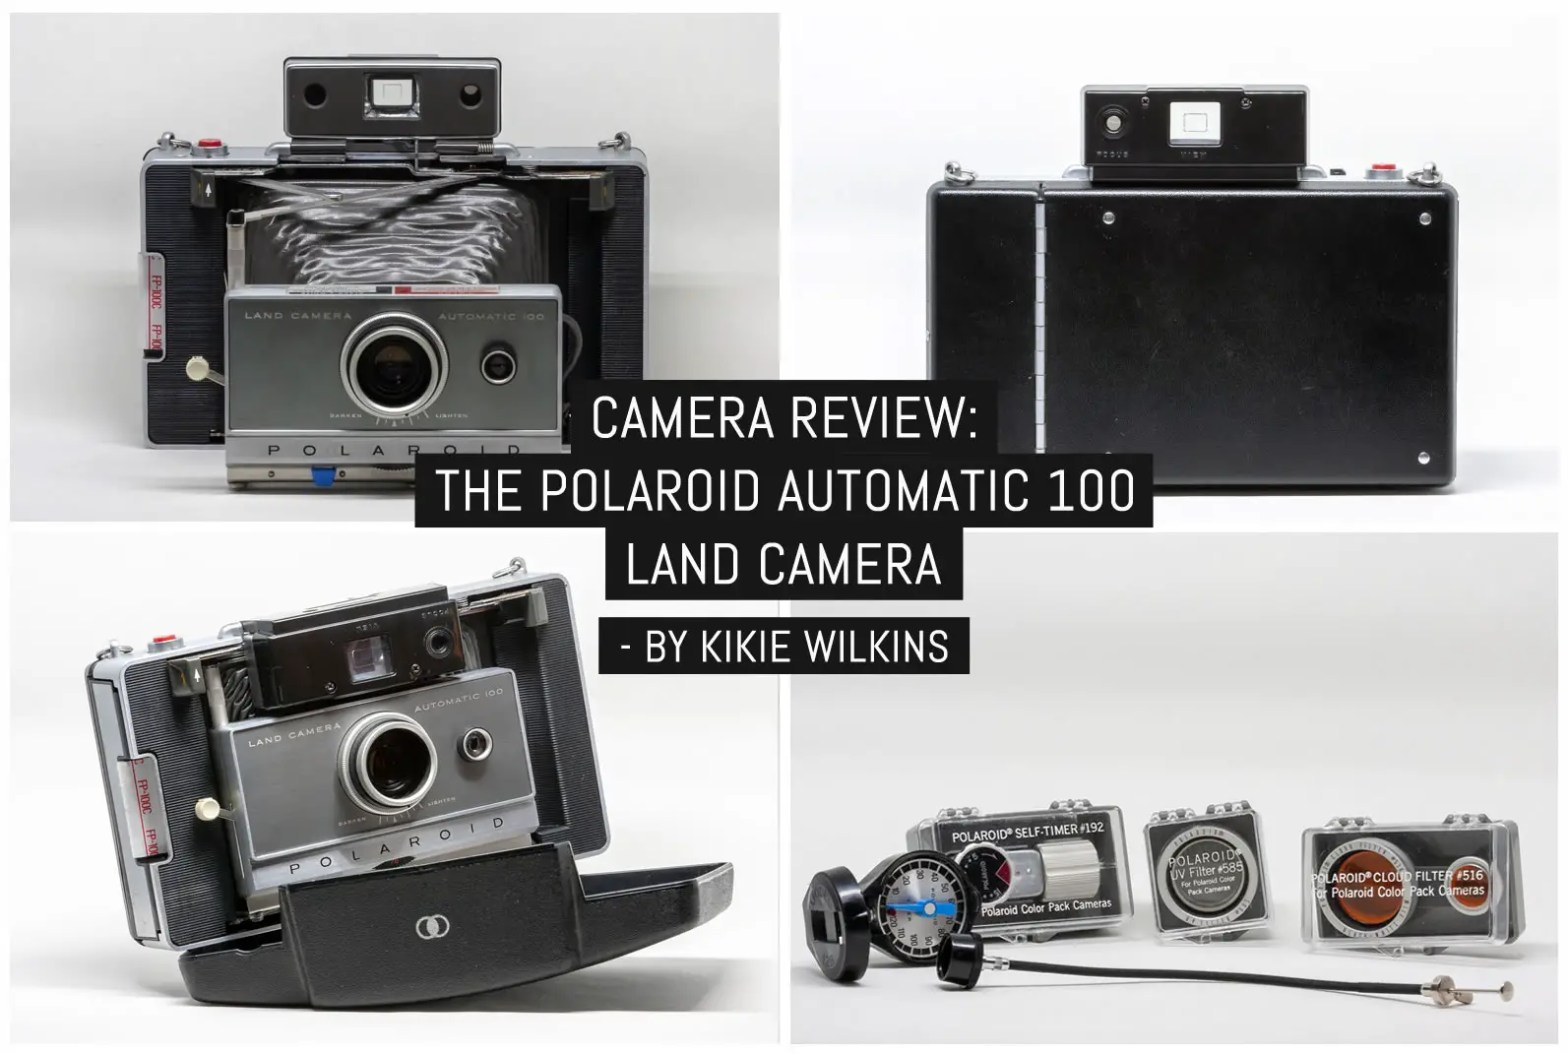 Camera review: The Polaroid Automatic 100 Land Camera - by Kikie Wilkins